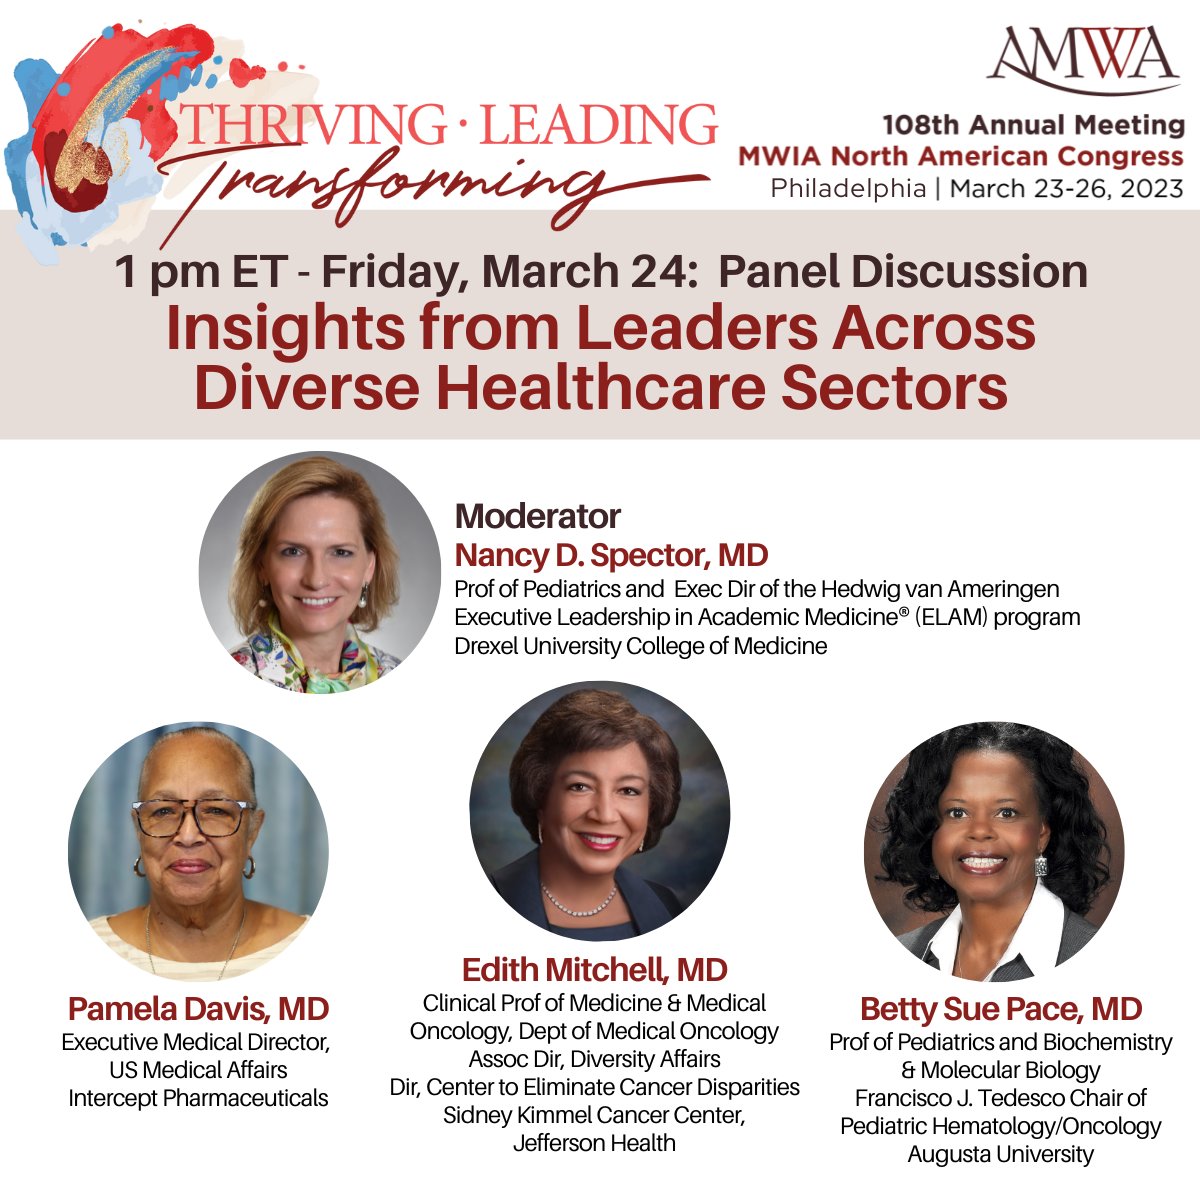 #AMWA2023 - Friday 3/24, we're offering a discussion on Transformational Leadership with senior #WomanInMedicine from across healthcare sectors led by 2023 Elizabeth Blackwell Award winner @NancyDSpector 
@InterceptPharma @DrexelMedicine @AUG_Health @TJUHospital 
#MedTwitter